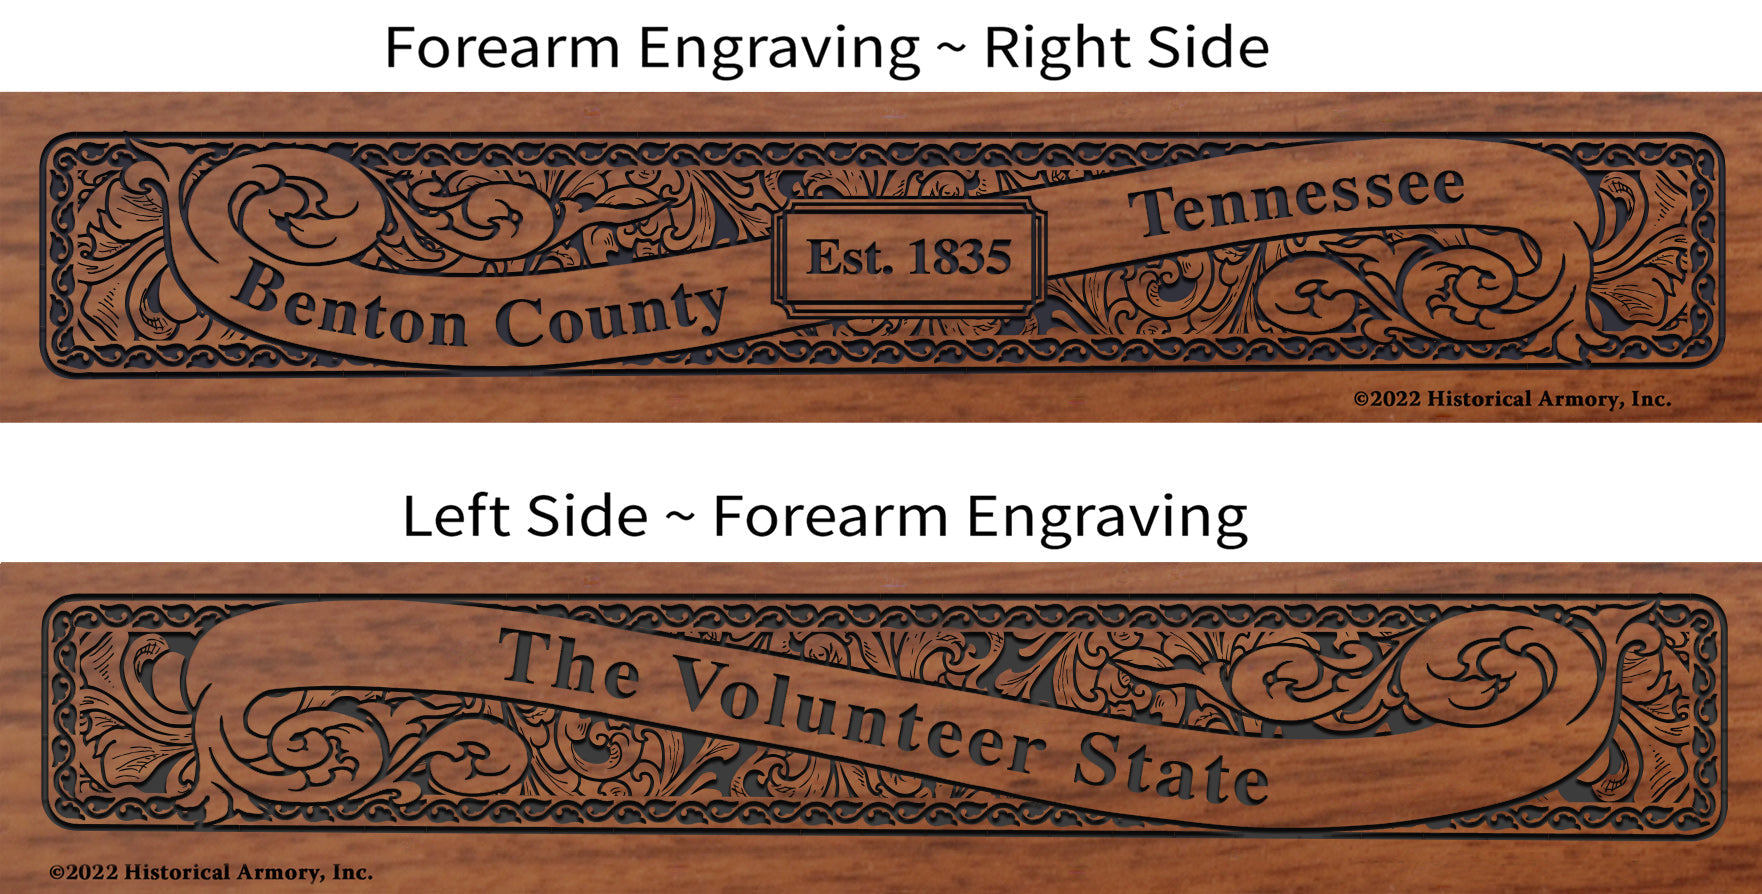 Benton County Tennessee Engraved Rifle Forearm